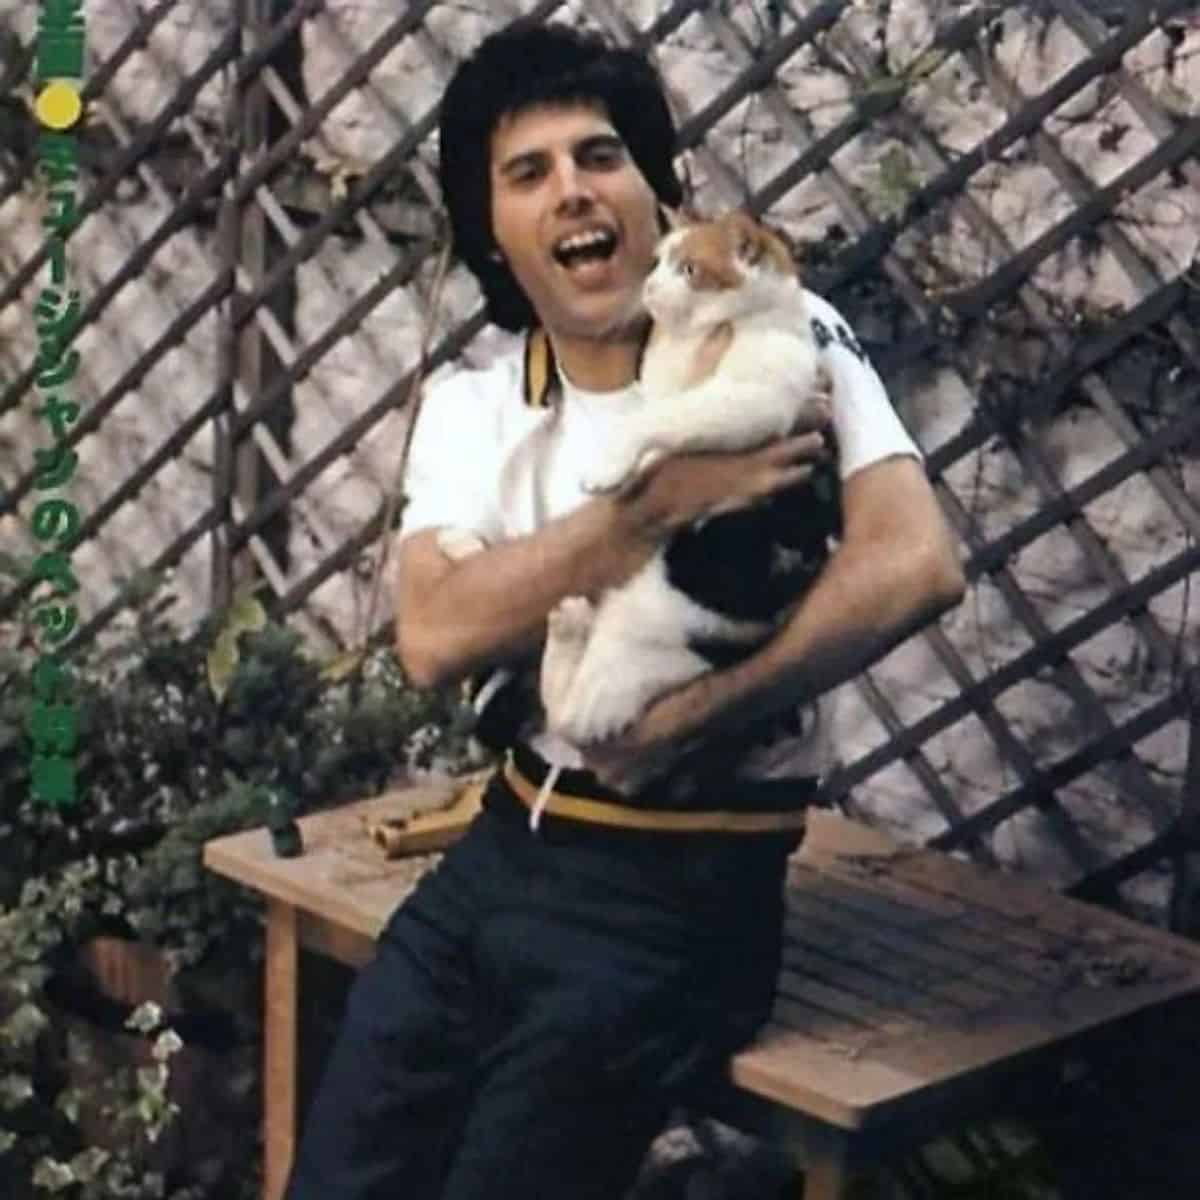 freddie smiling while holding his cat